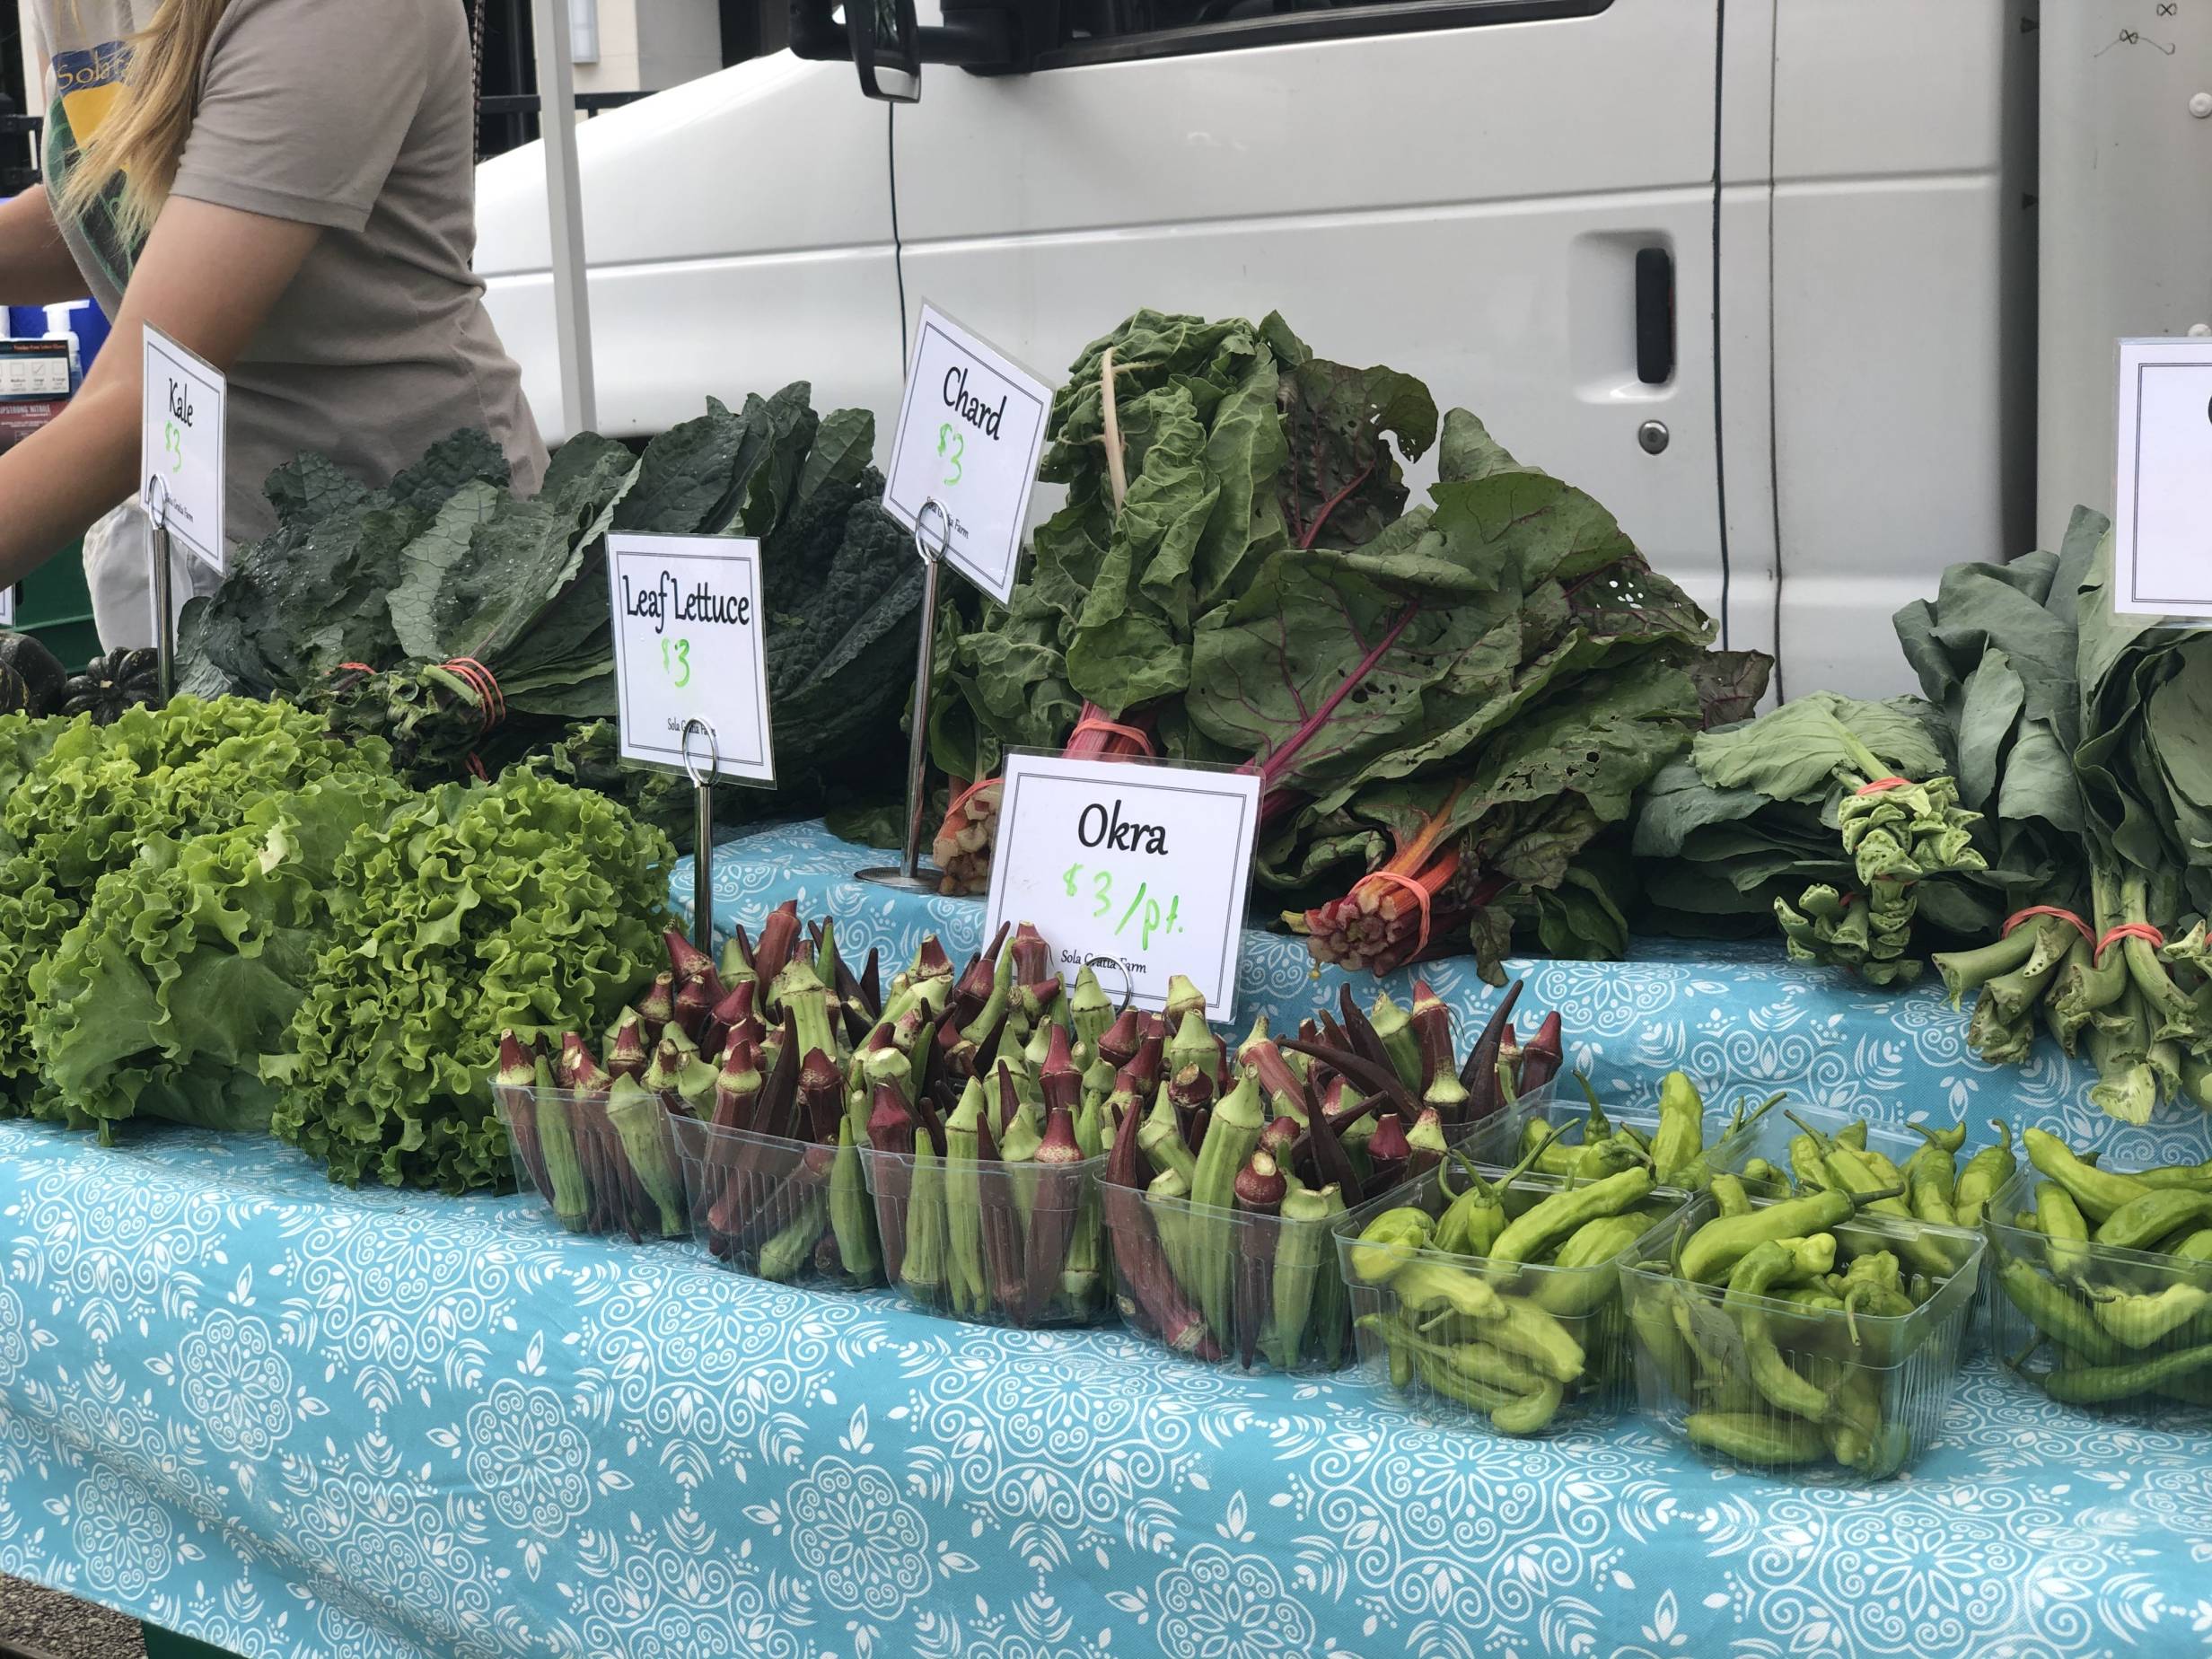 On a table with a light blue tablecloth, there are fresh veggies for sale in plastic square containers. Most of the veggies in the photo are okra.  Photo by Alyssa Buckley.